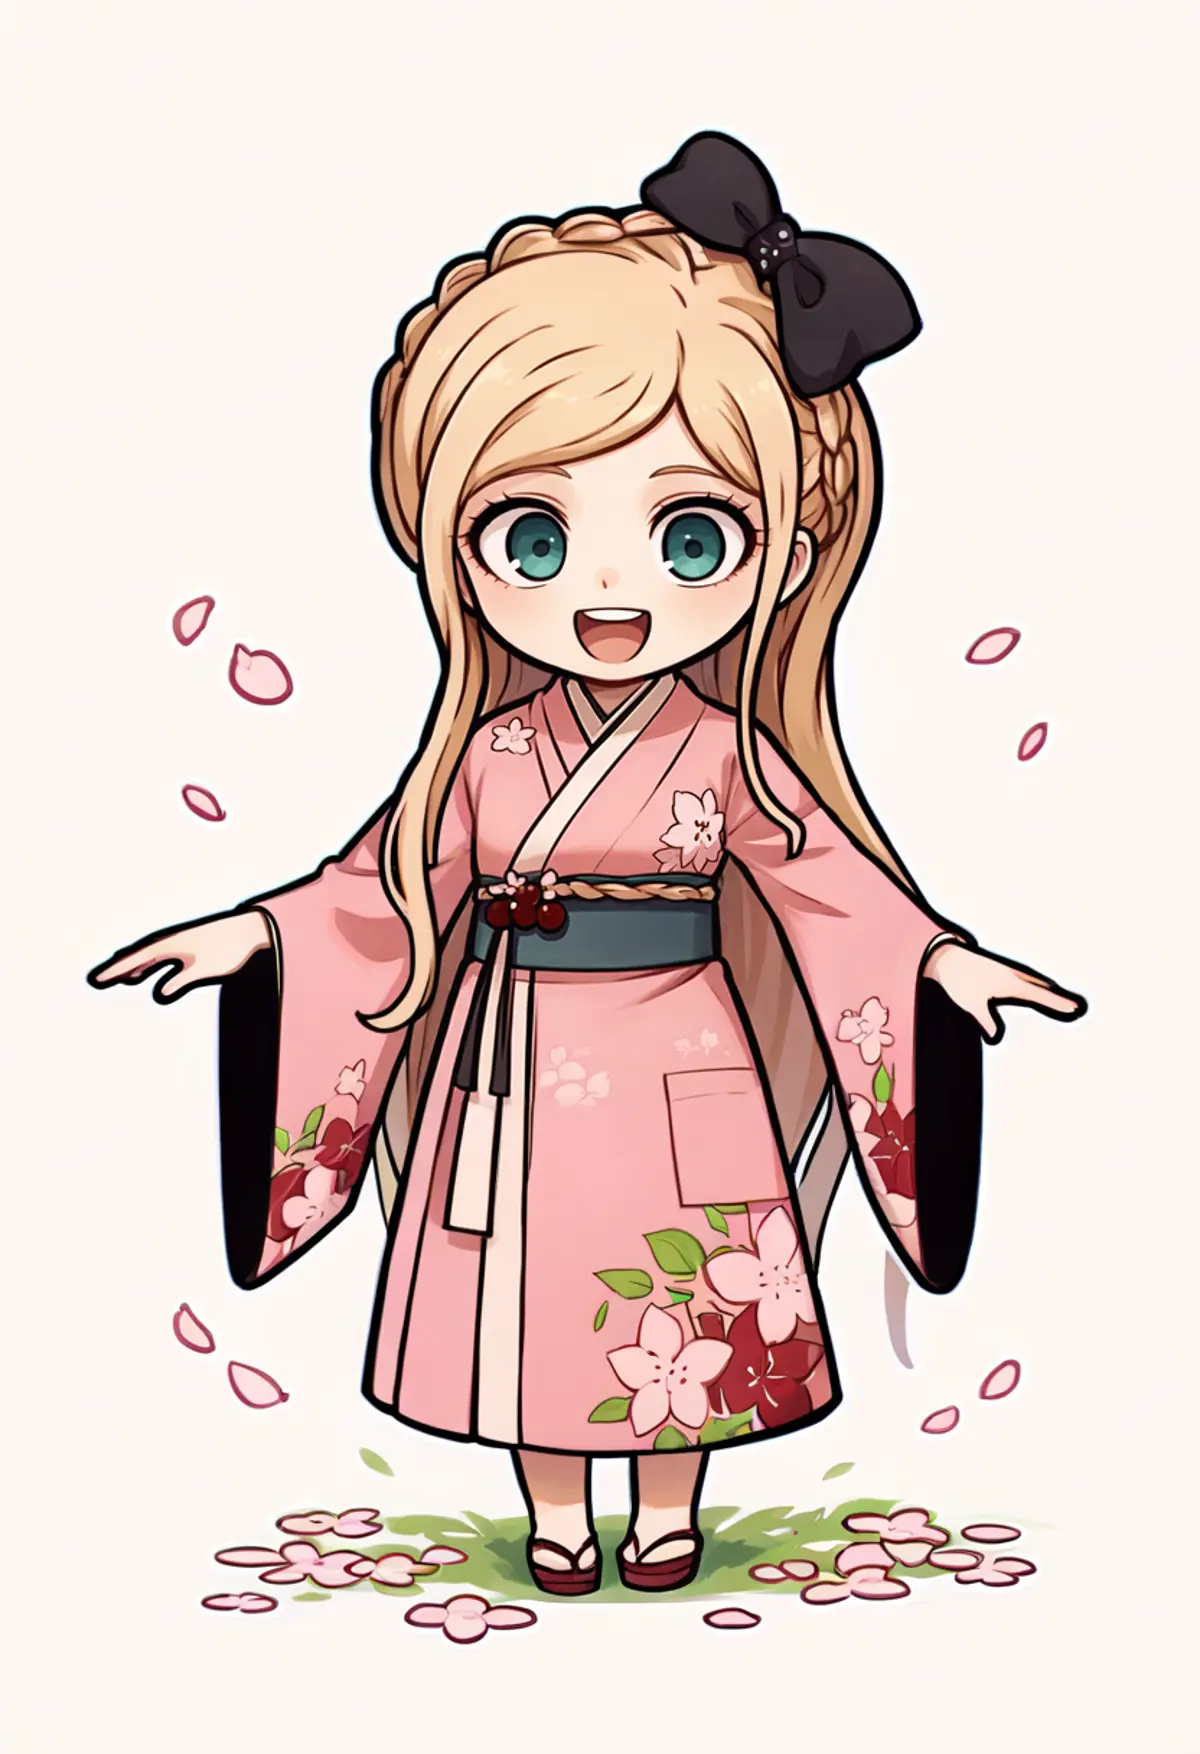 A young woman dressed in a pink kimono adorned with floral patterns standing amidst falling petals. She has long, blonde hair tied with a black bow and wide, expressive blue eyes. The kimono is detailed with a black obi and. 